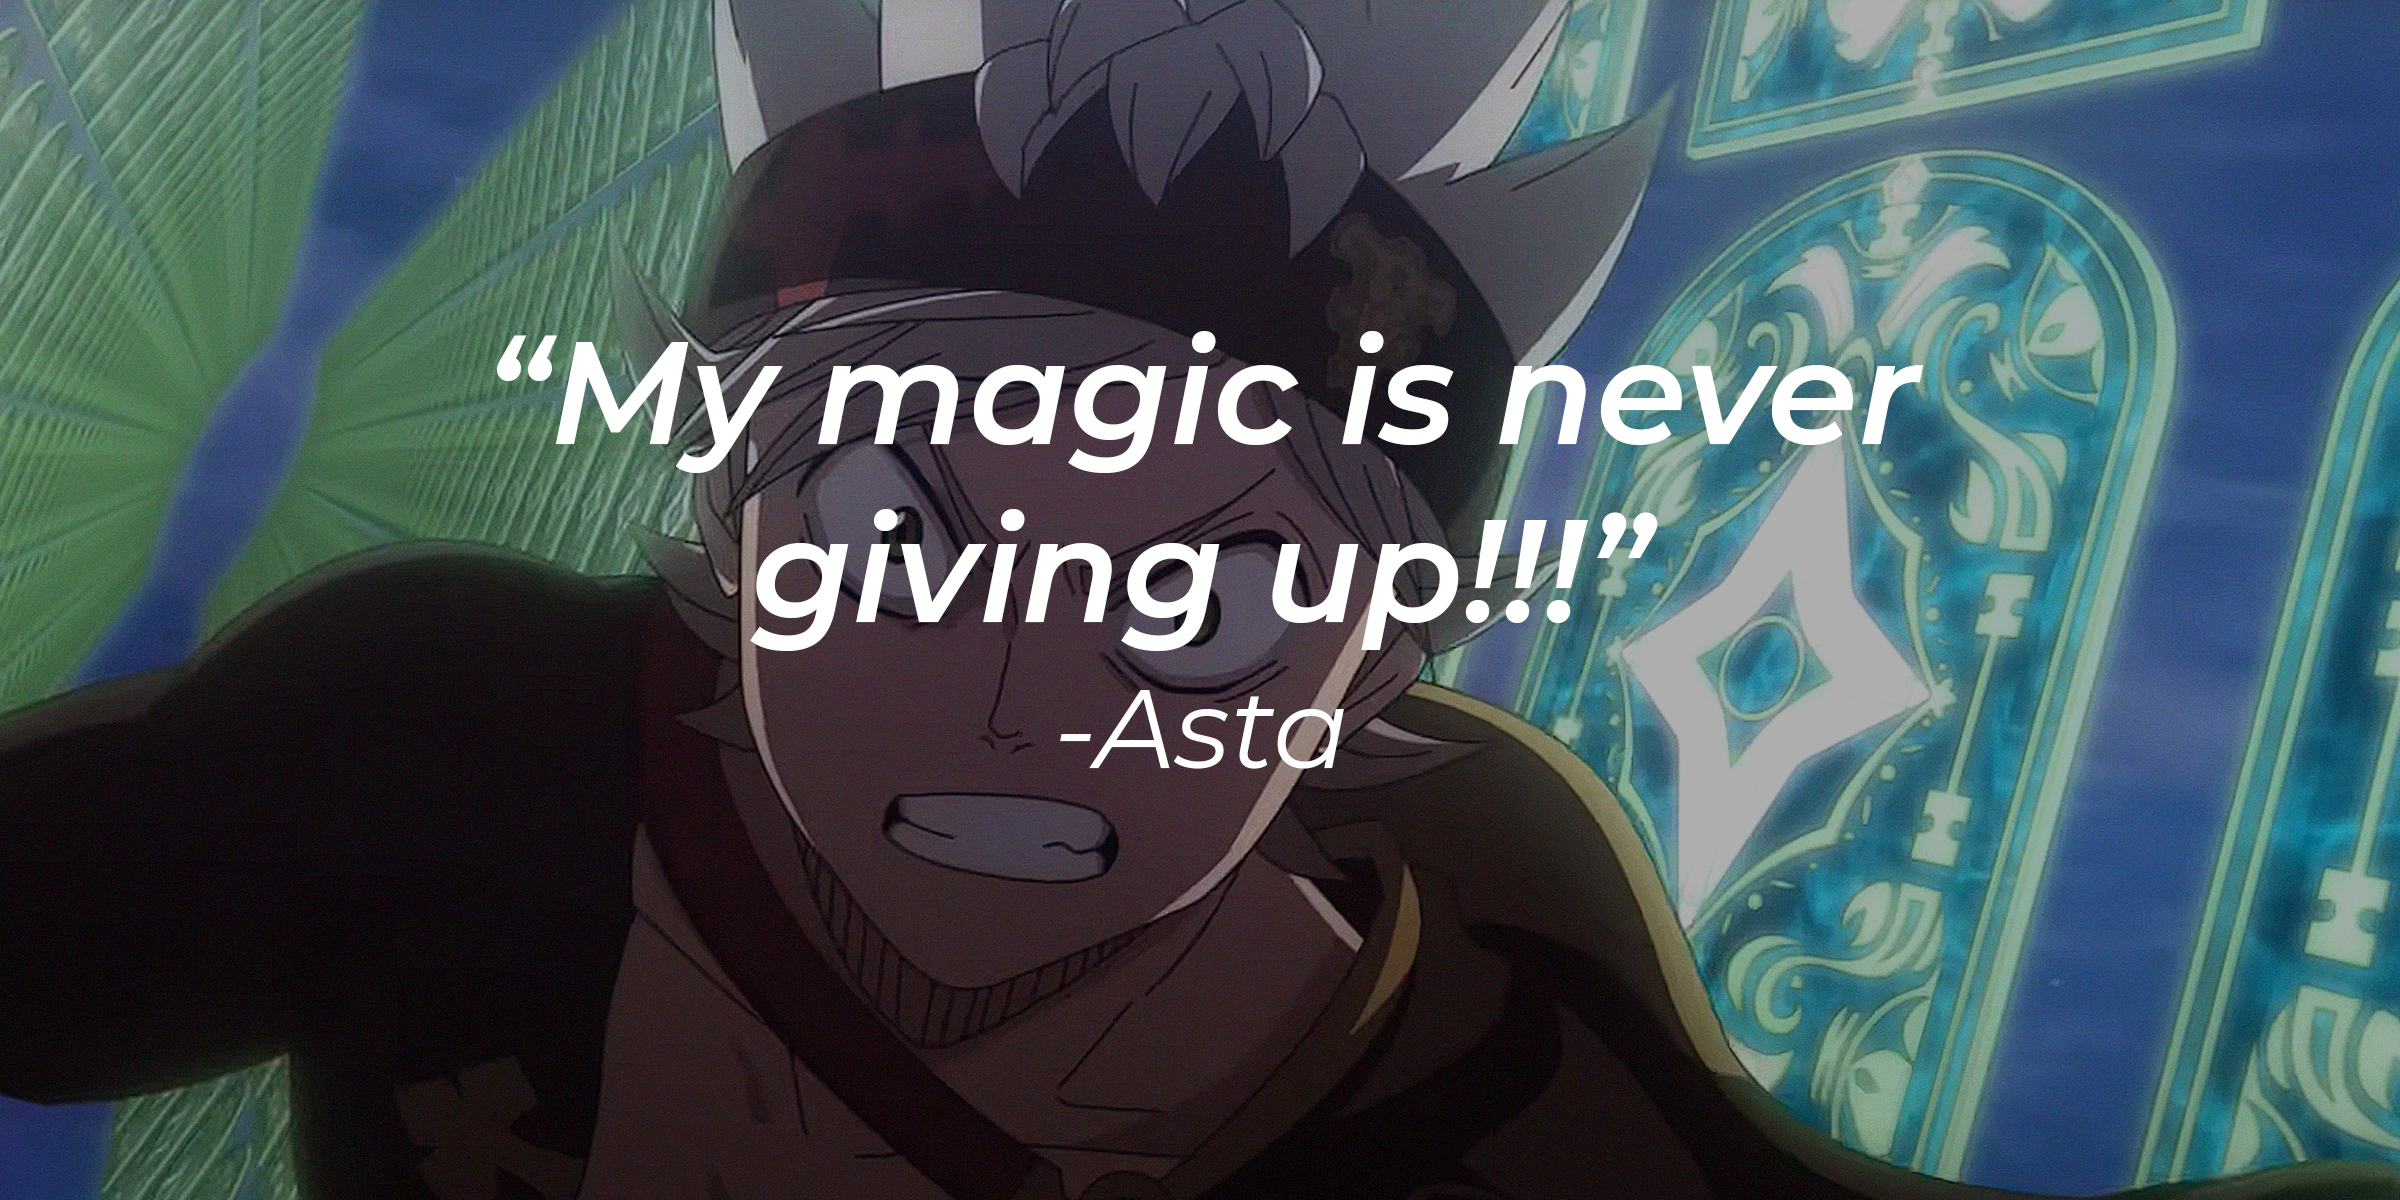 An image of Asta with his quote: “My magic is never giving up!!!” | Source: youtube/netflixanime